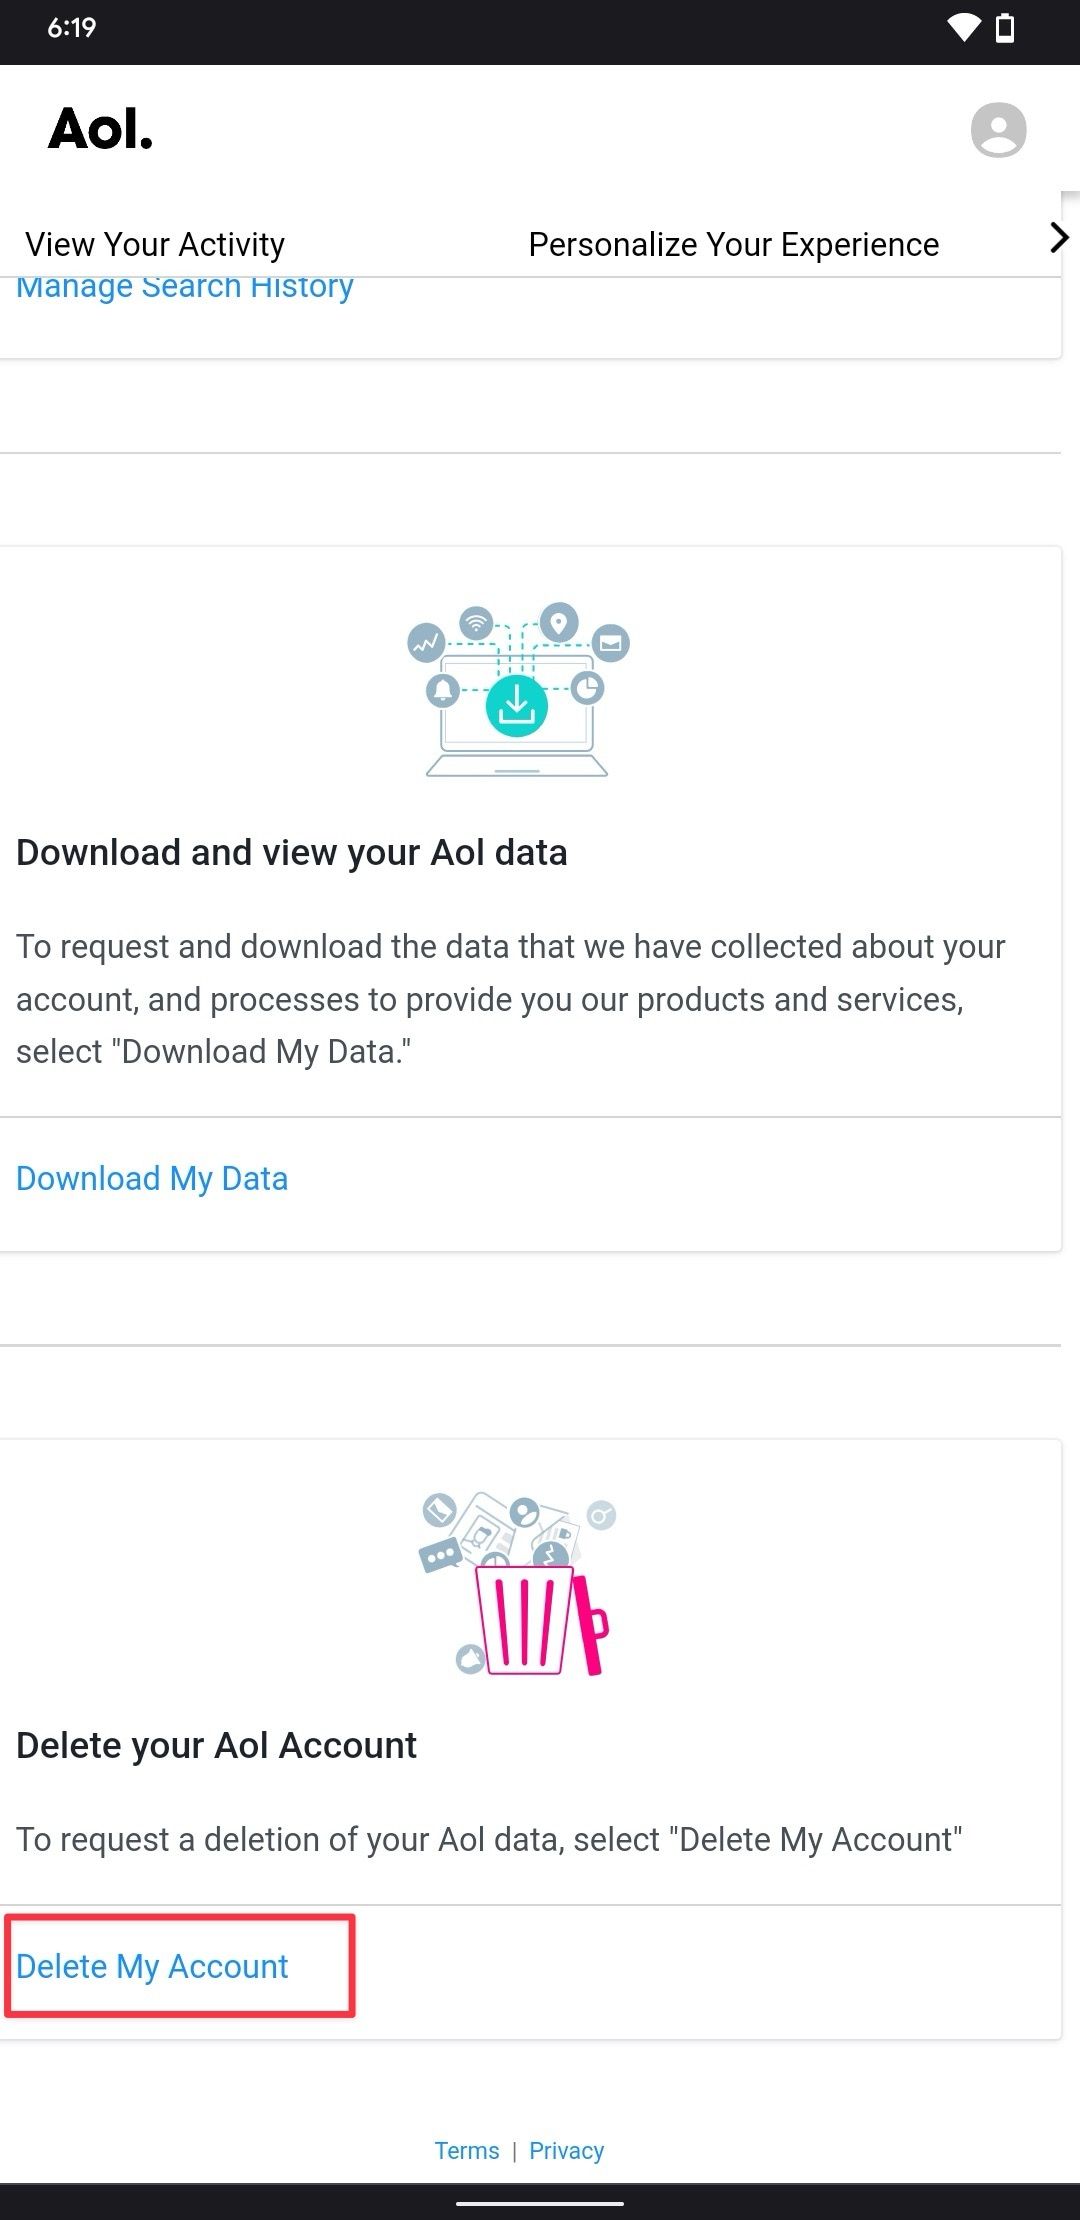 AOL mobile privacy dashboard page screenshot showing Delete my account button